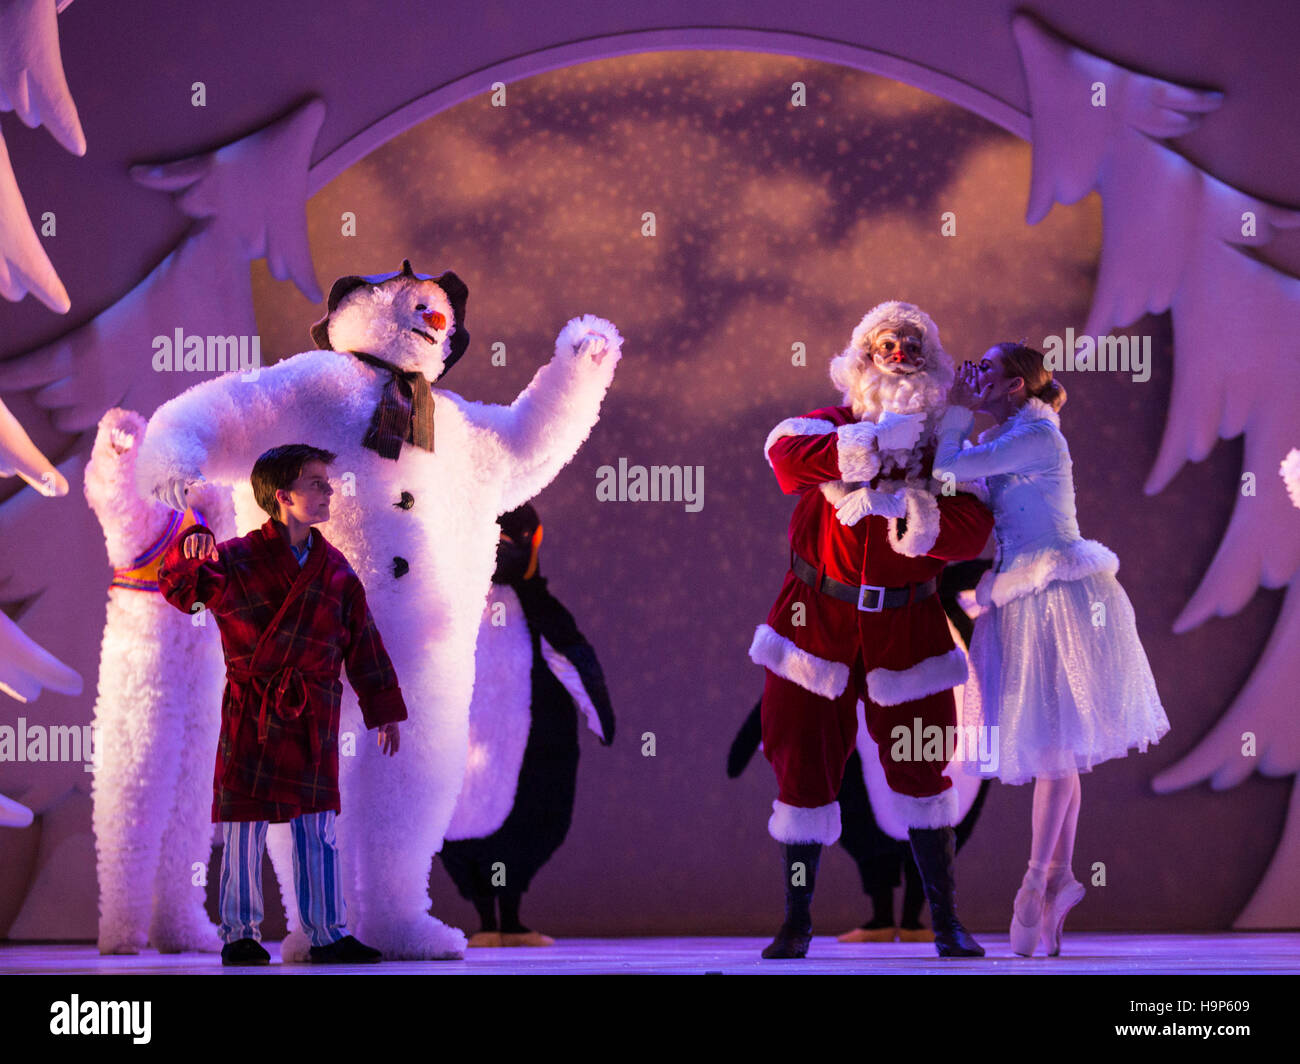 London, UK. 23 November 2016. L-R: Cameron Sutherland (Boy), Martin Fenton (Snowman), Federico Casadei (Father Christmas) and Caroline Crawley (Ice Princess). The Snowman returns to The Peacock theatre for the Christmas season and runs from 23 November 2016 to 1 January 2017. Based on the book by Raymond Briggs and the film directed by Dianne Jackson, the show tells the story of a young boy's adventures when his snowman comes to life on Christmas Eve. With Martin Fenton as Snowman and Cameron Sutherland as Boy. Stock Photo